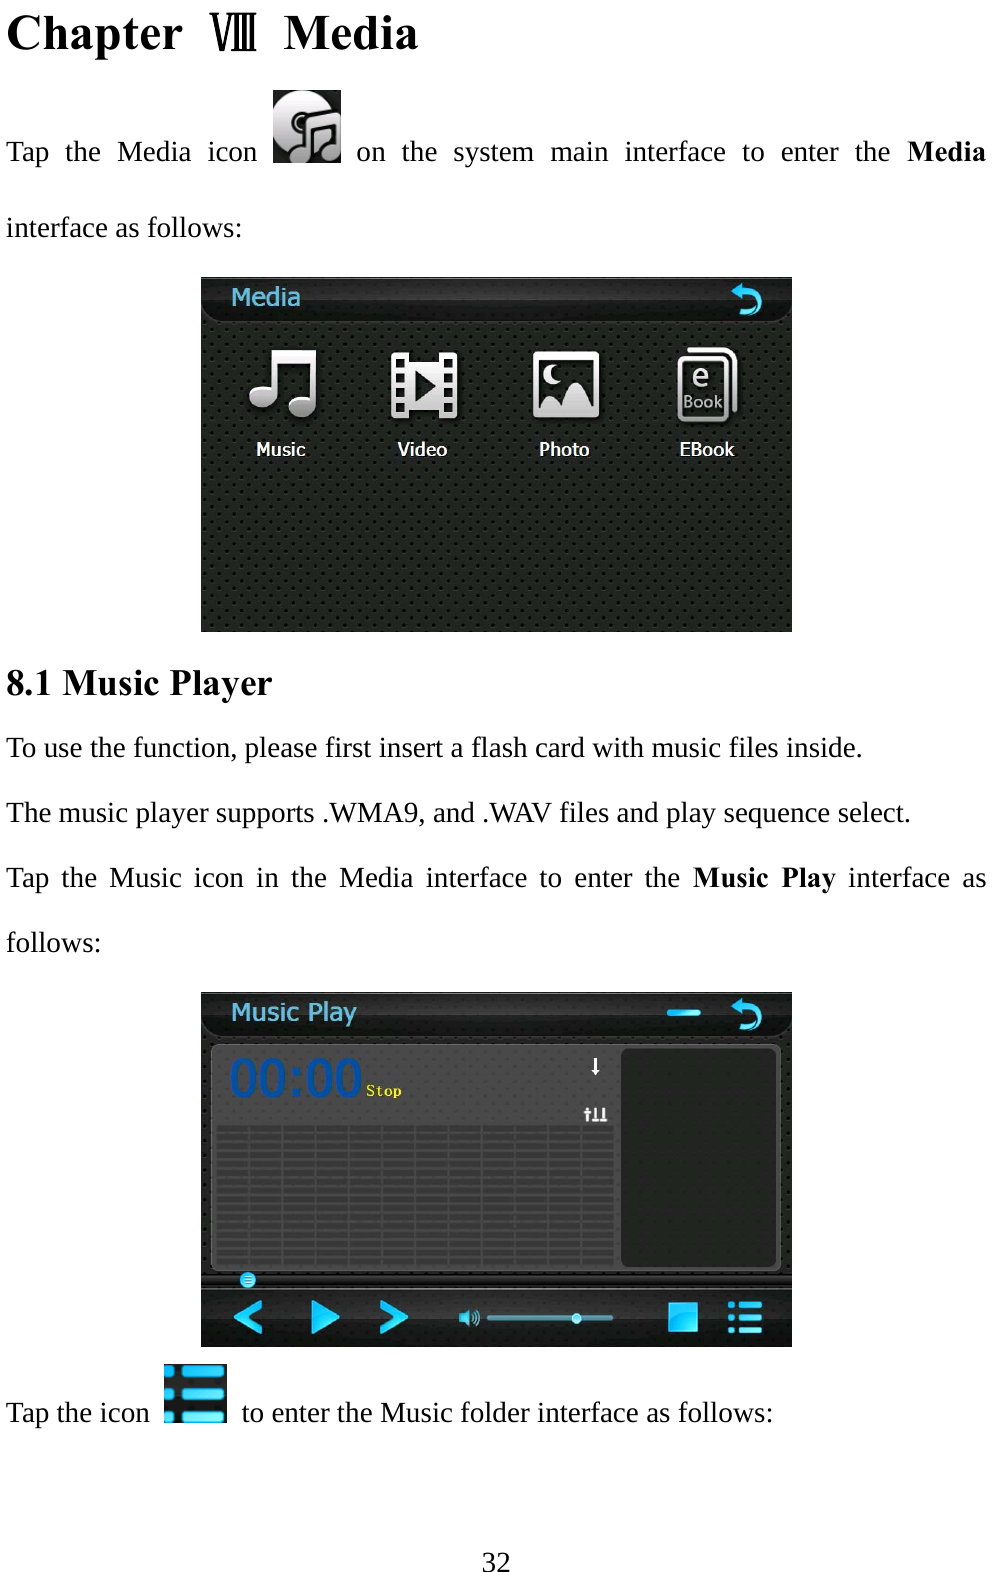  32 Chapter  Ⅷ Media  Tap the Media icon   on the system main interface to enter the Media interface as follows:  8.1 Music Player   To use the function, please first insert a flash card with music files inside. The music player supports .WMA9, and .WAV files and play sequence select. Tap the Music icon in the Media interface to enter the Music Play interface as follows:  Tap the icon    to enter the Music folder interface as follows: 